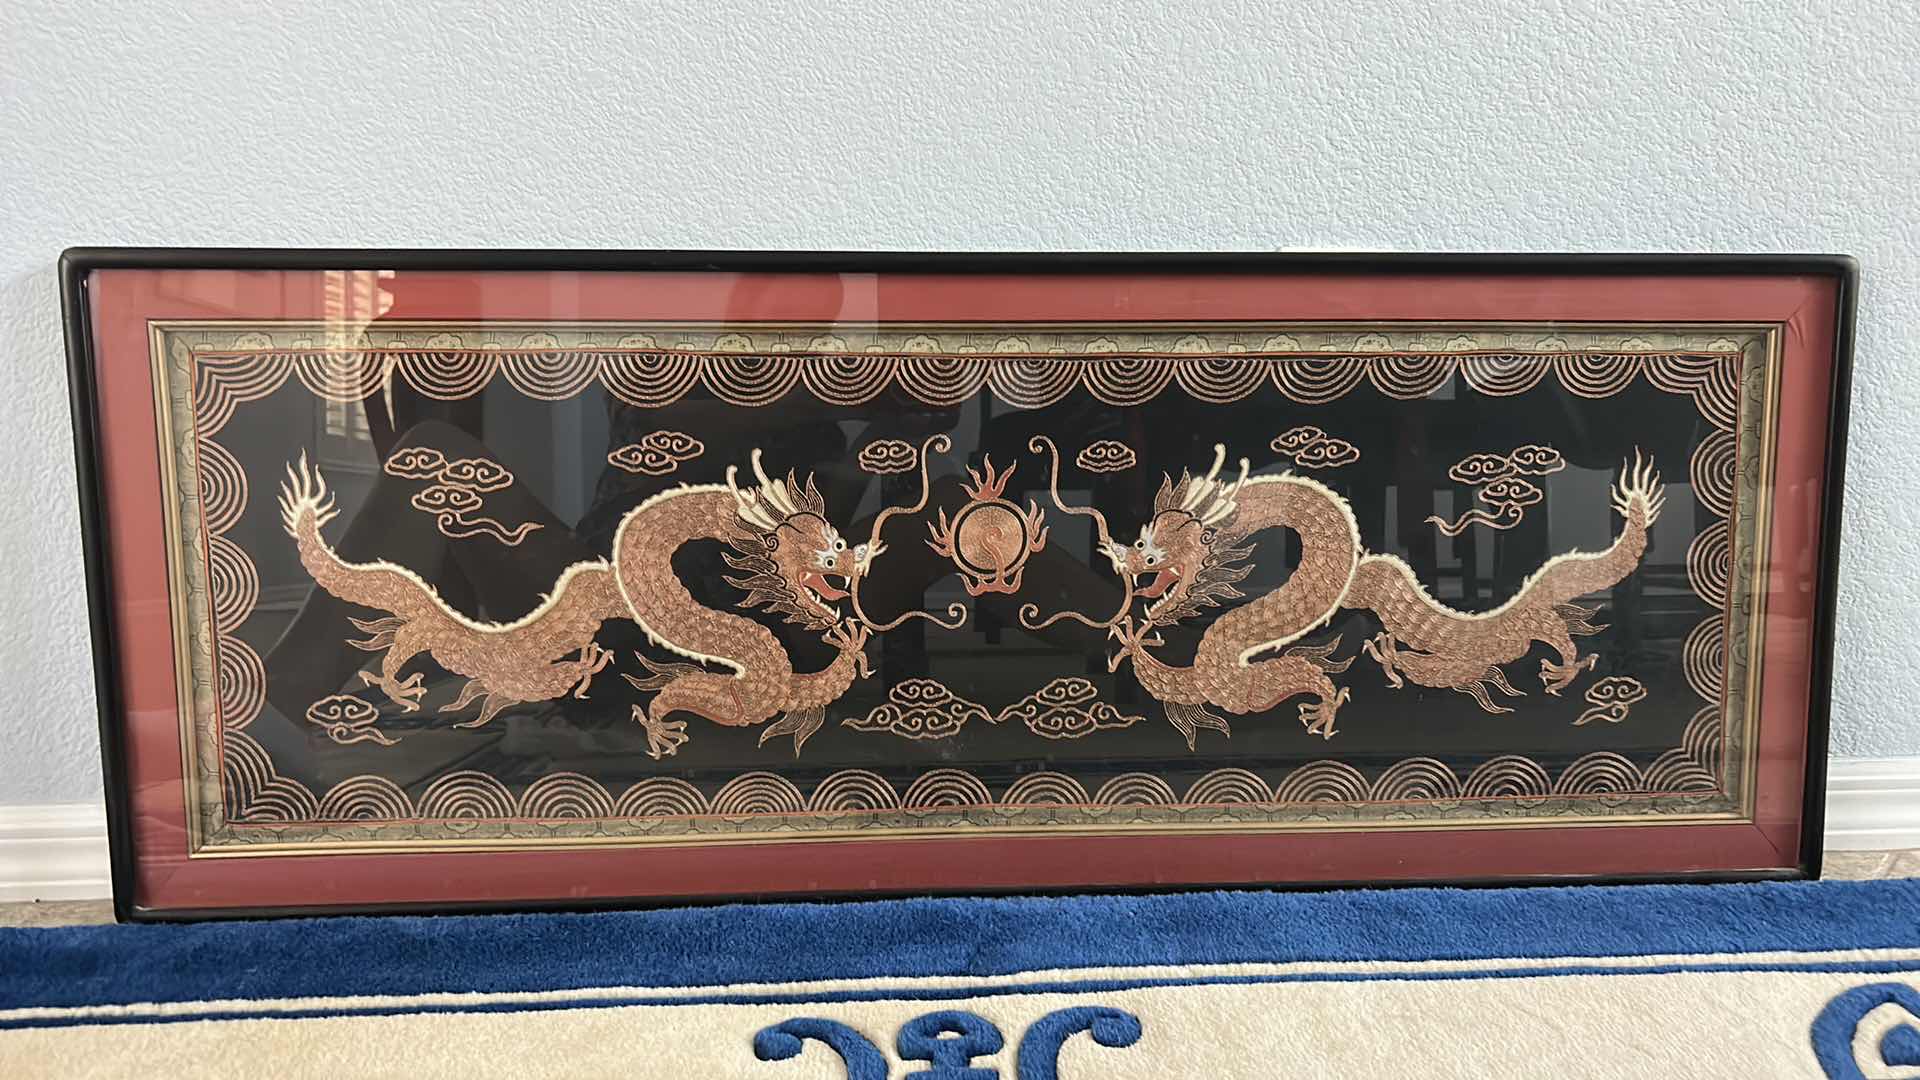 Photo 9 of ANTIQUE CHINESE TEXTILE FABRIC, DRAGONS  SILK WITH SILK THREAD HAND EMBROIDERY ARTWORK FRAMED 4’ x 19”